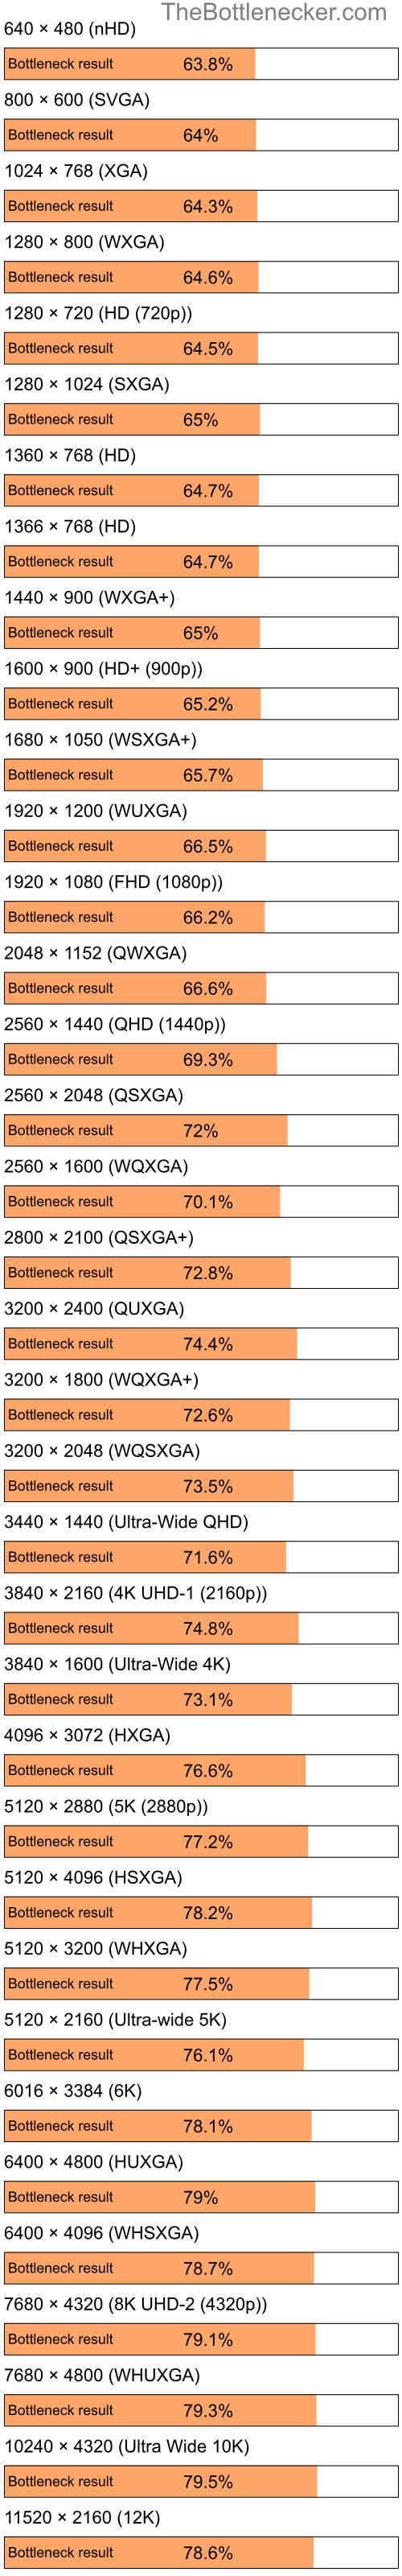 Bottleneck results by resolution for Intel Pentium 4 and NVIDIA GeForce Go 7300 in Processor Intense Tasks